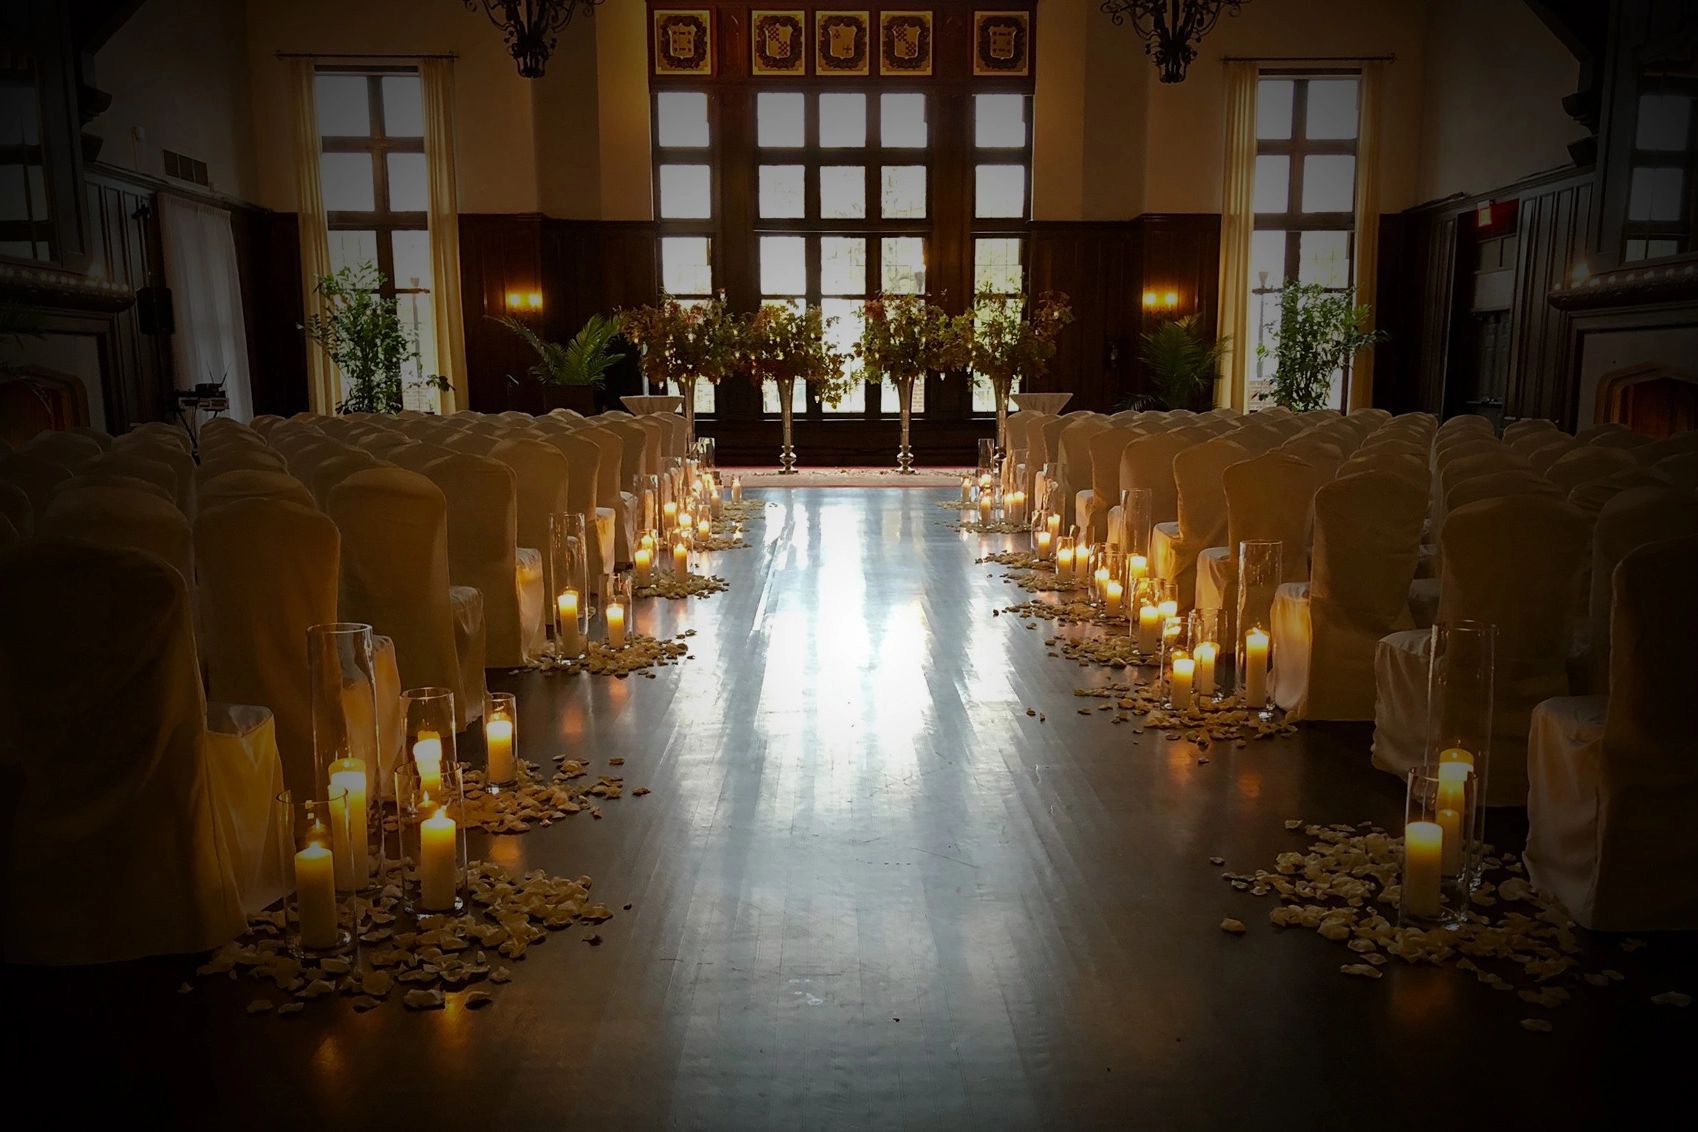 One Fine Day Ceremony Officiants Candlelit Aisle, Chicago Officiants, Romantic, Dream Ceremony